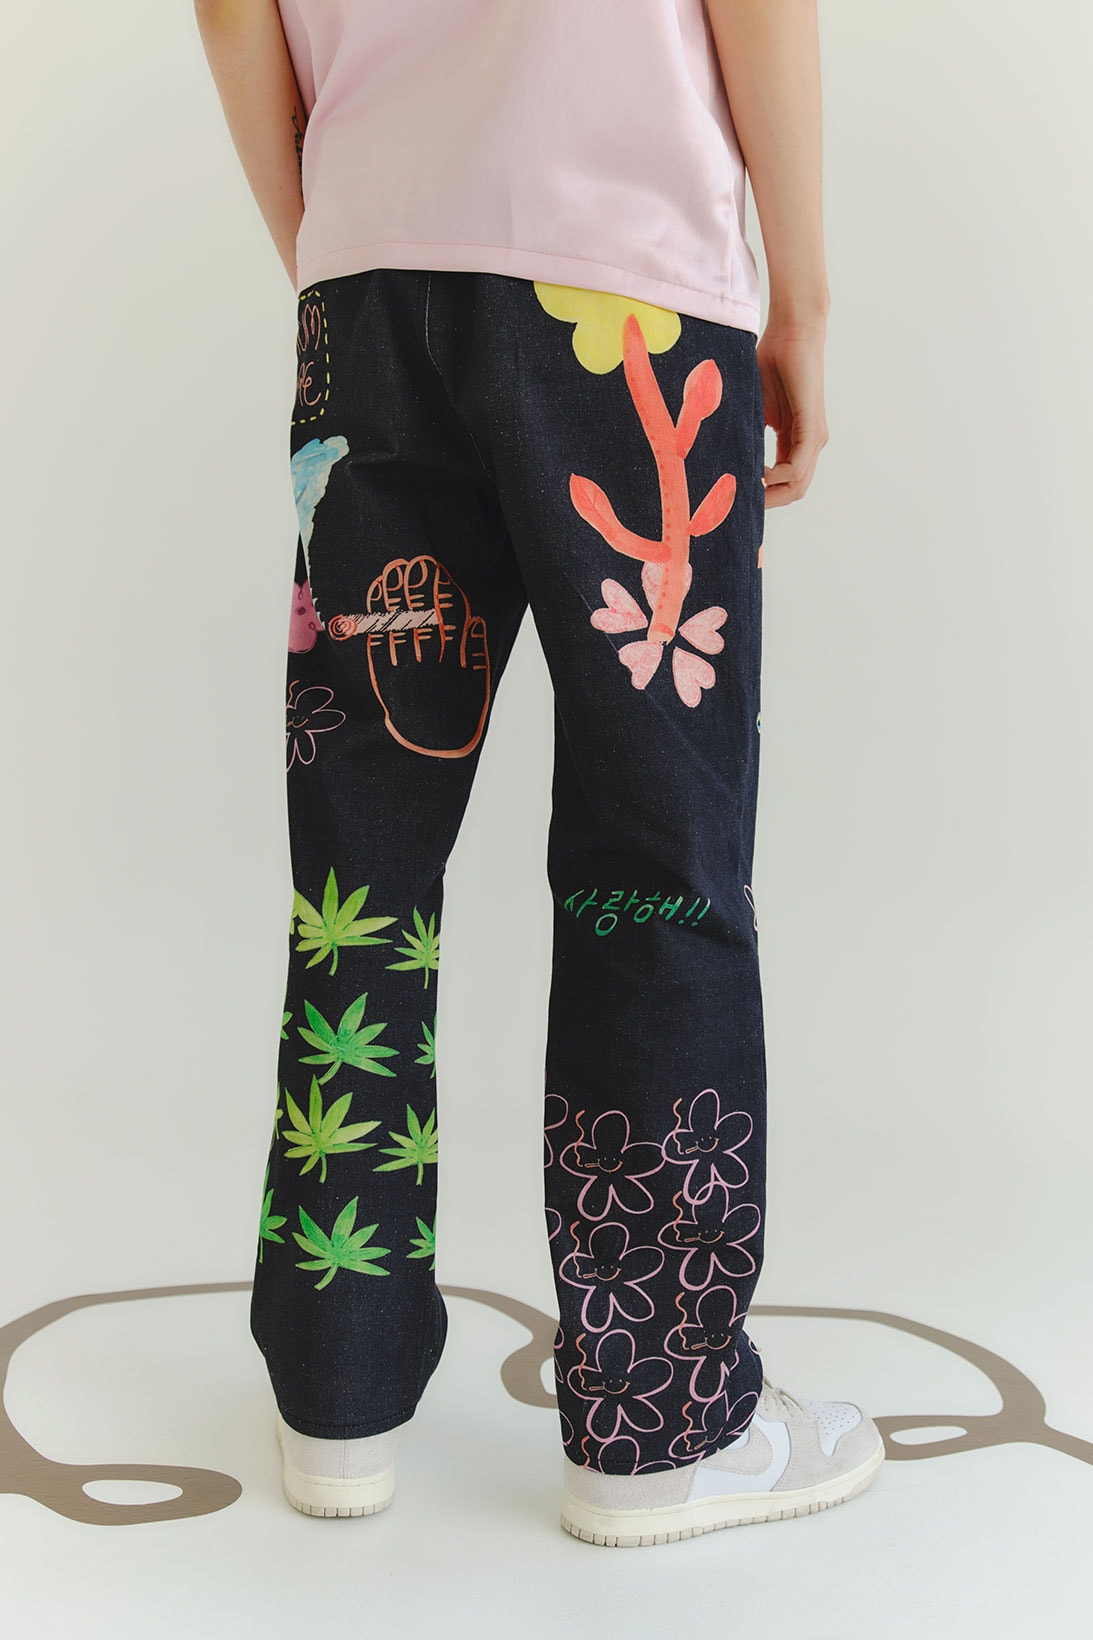 sundae school pre fall 2021 summer we drew collection jeans illustrations graphics pants